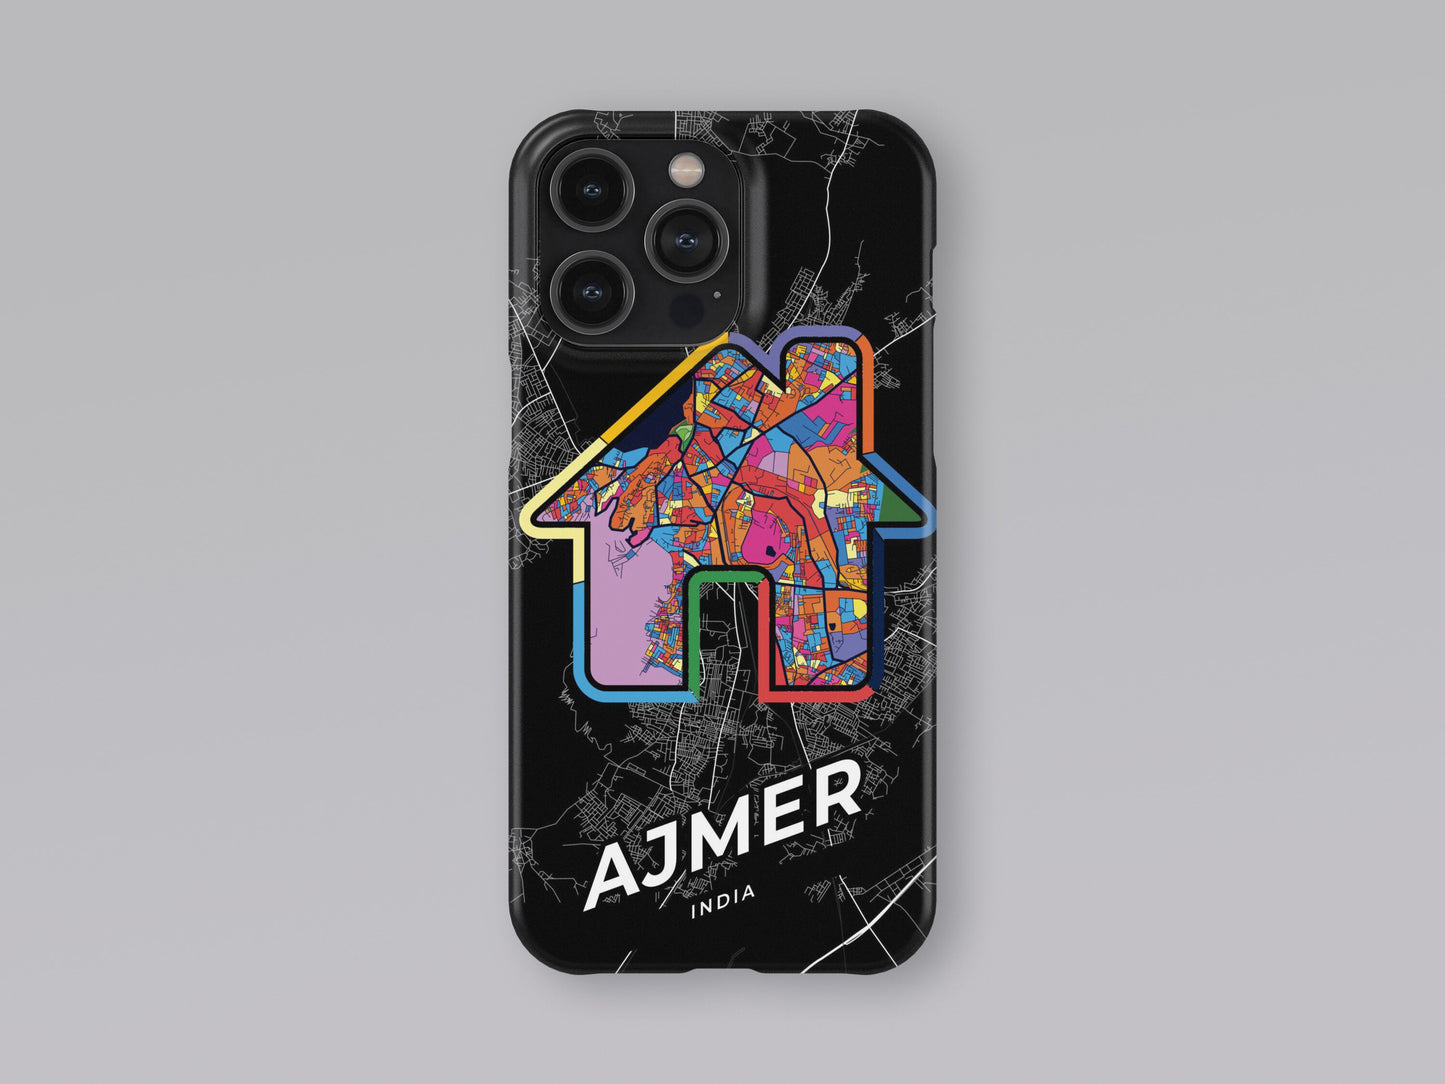 Ajmer India slim phone case with colorful icon. Birthday, wedding or housewarming gift. Couple match cases. 3